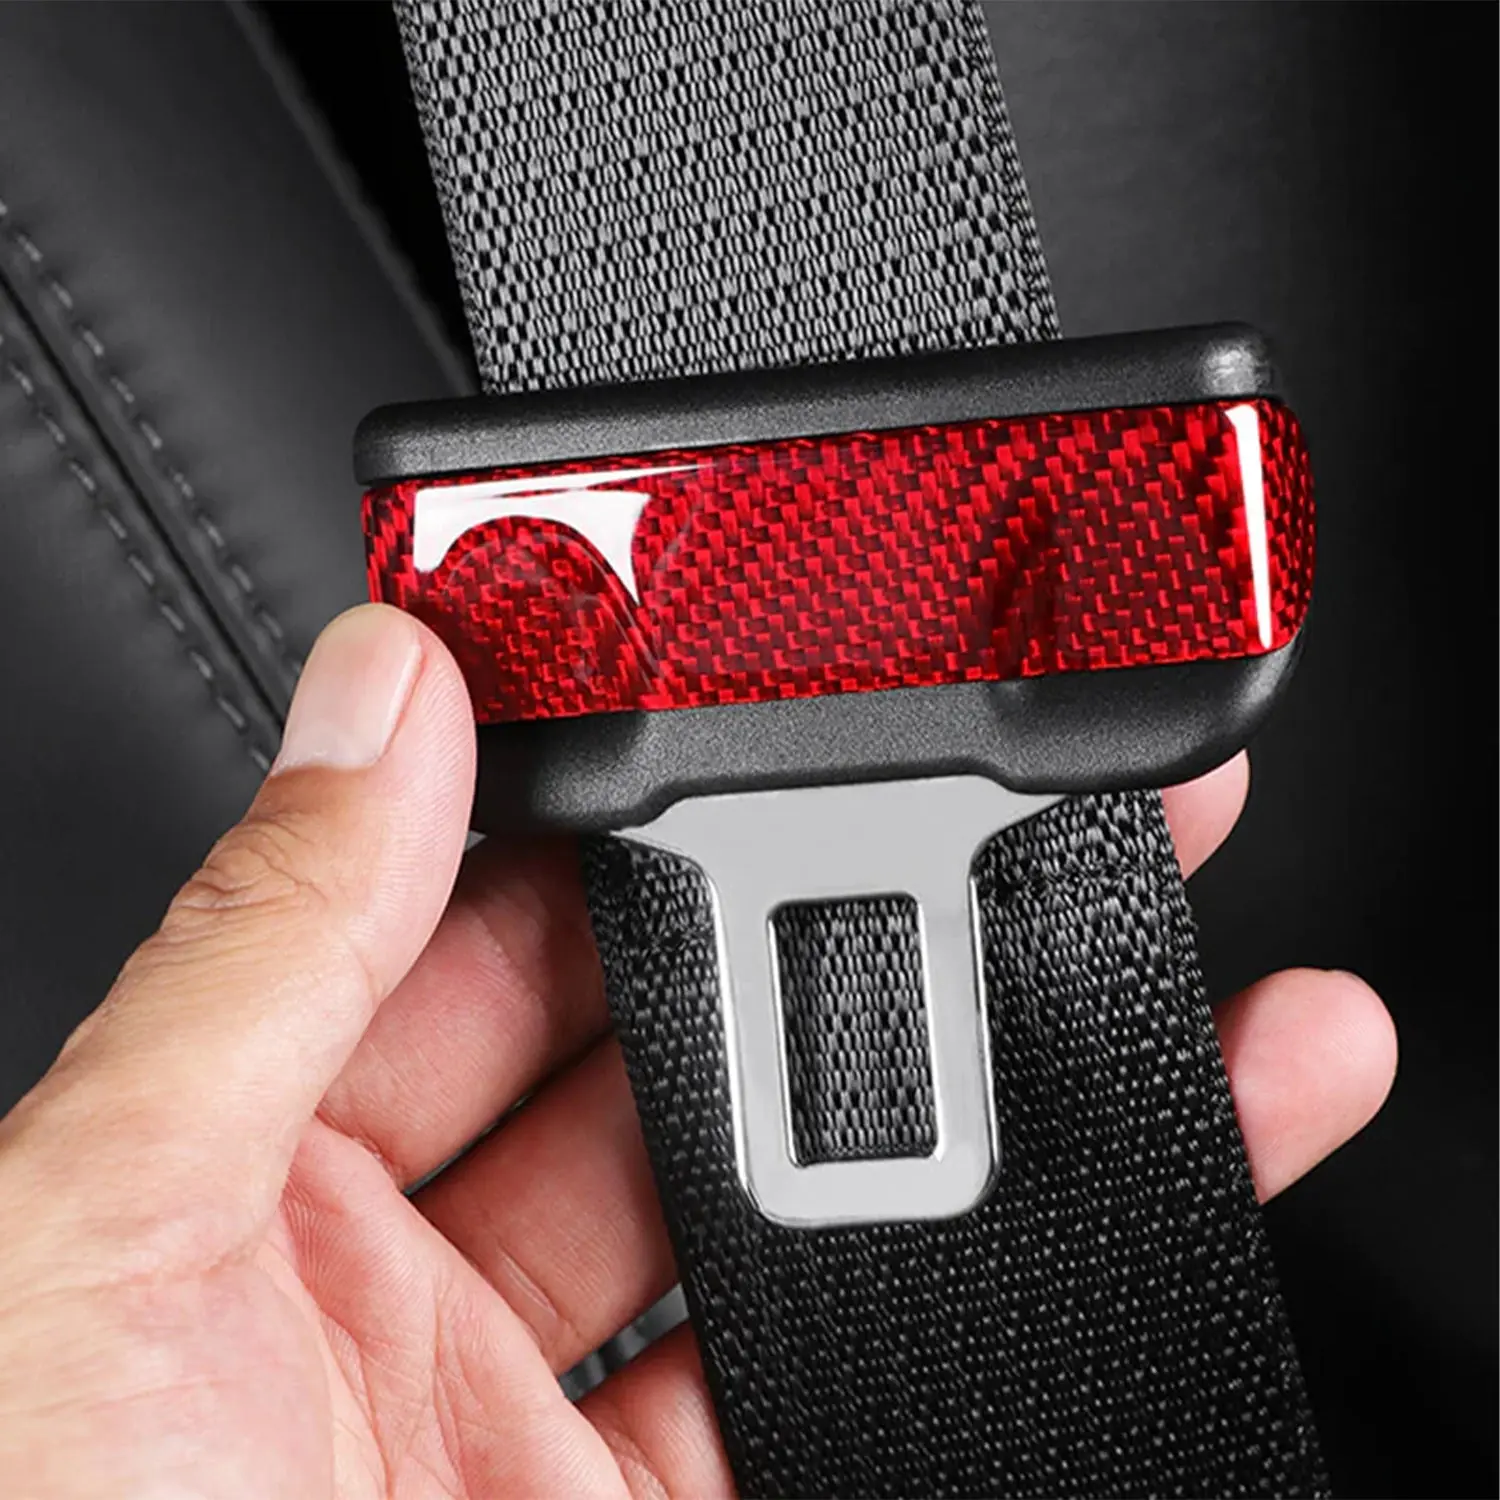 Adreama Tesla Model 3 Seat Belt Latch Cover (2 pcs) Made With Real Premium Dry Carbon Fiber (Ships Within 5-7 Days)